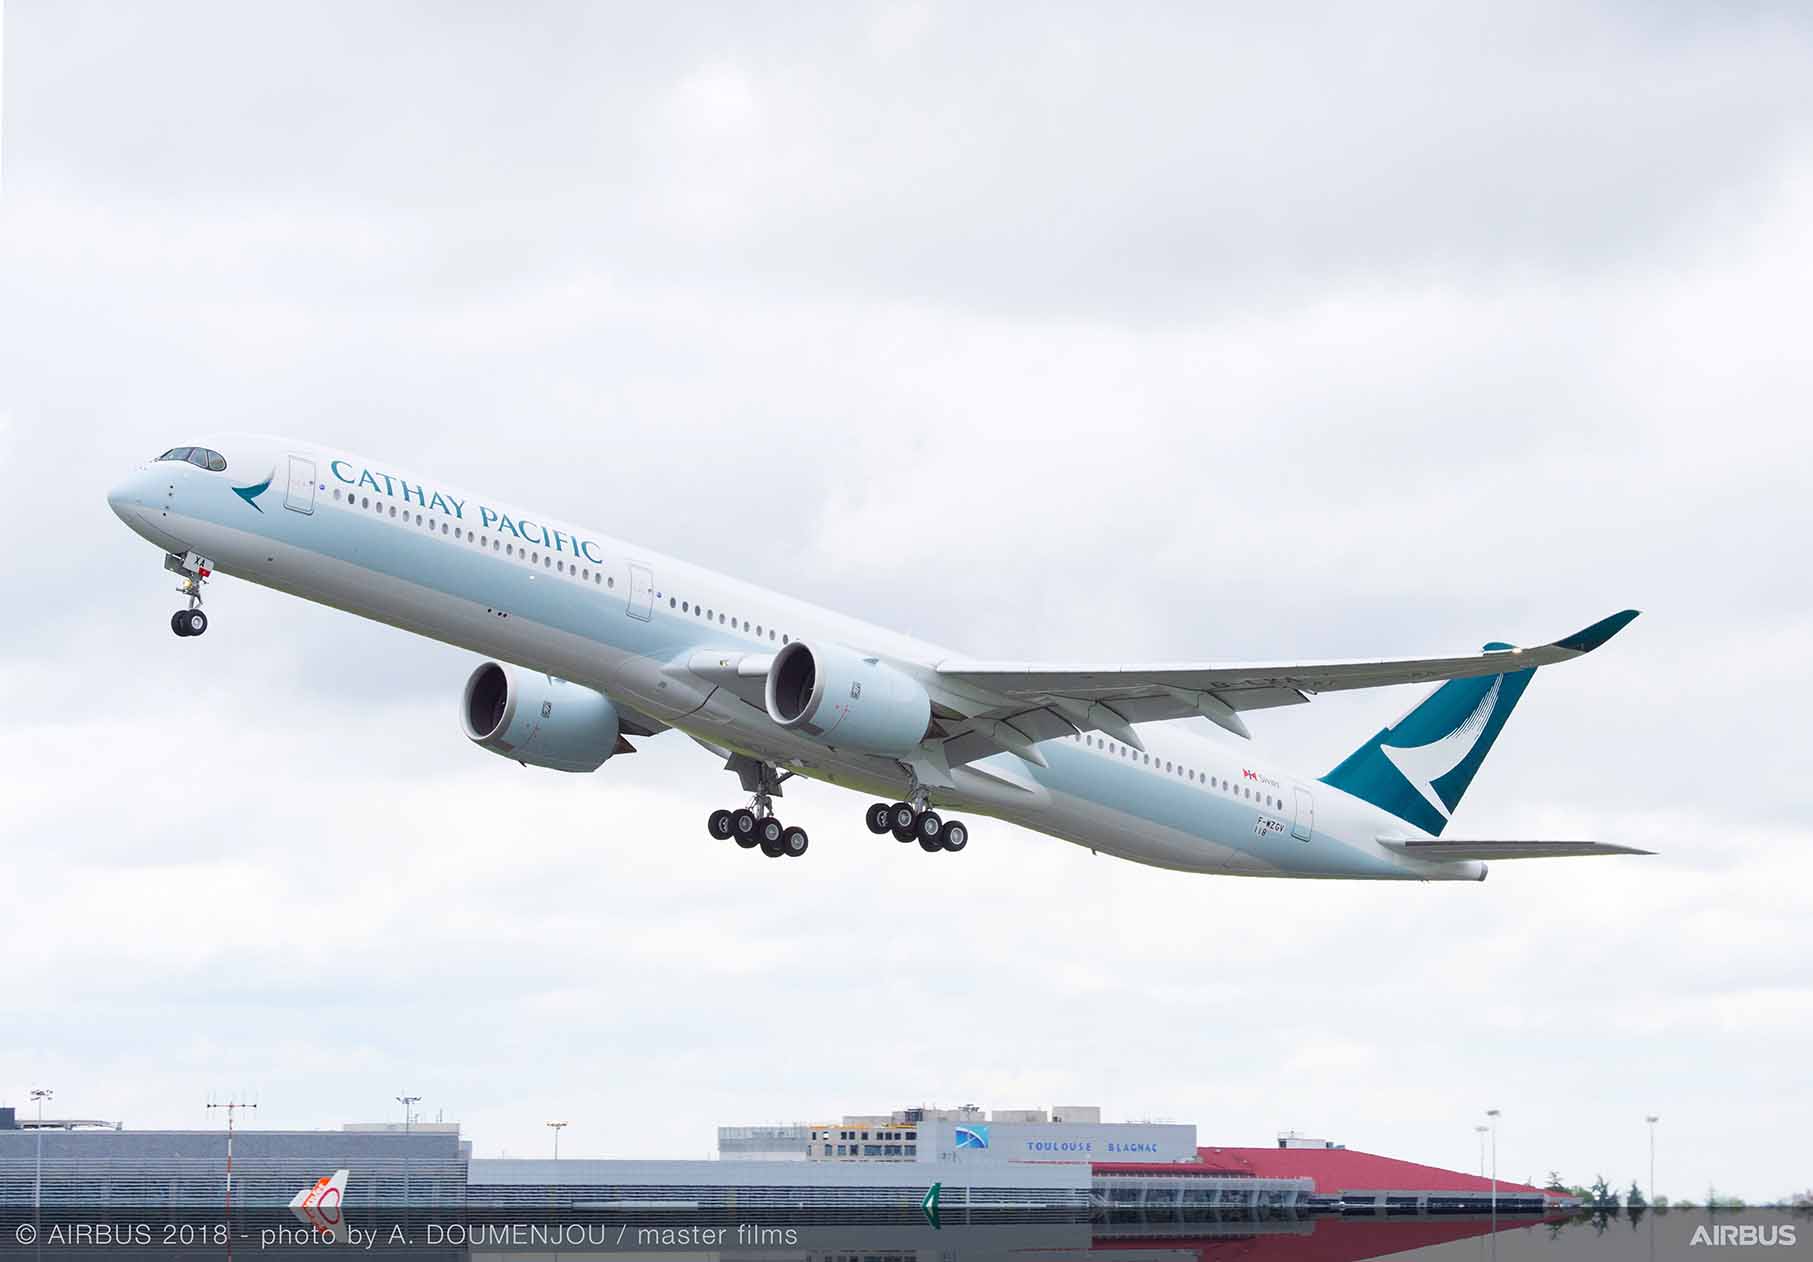 Cathay Pacific issues statement defending firings